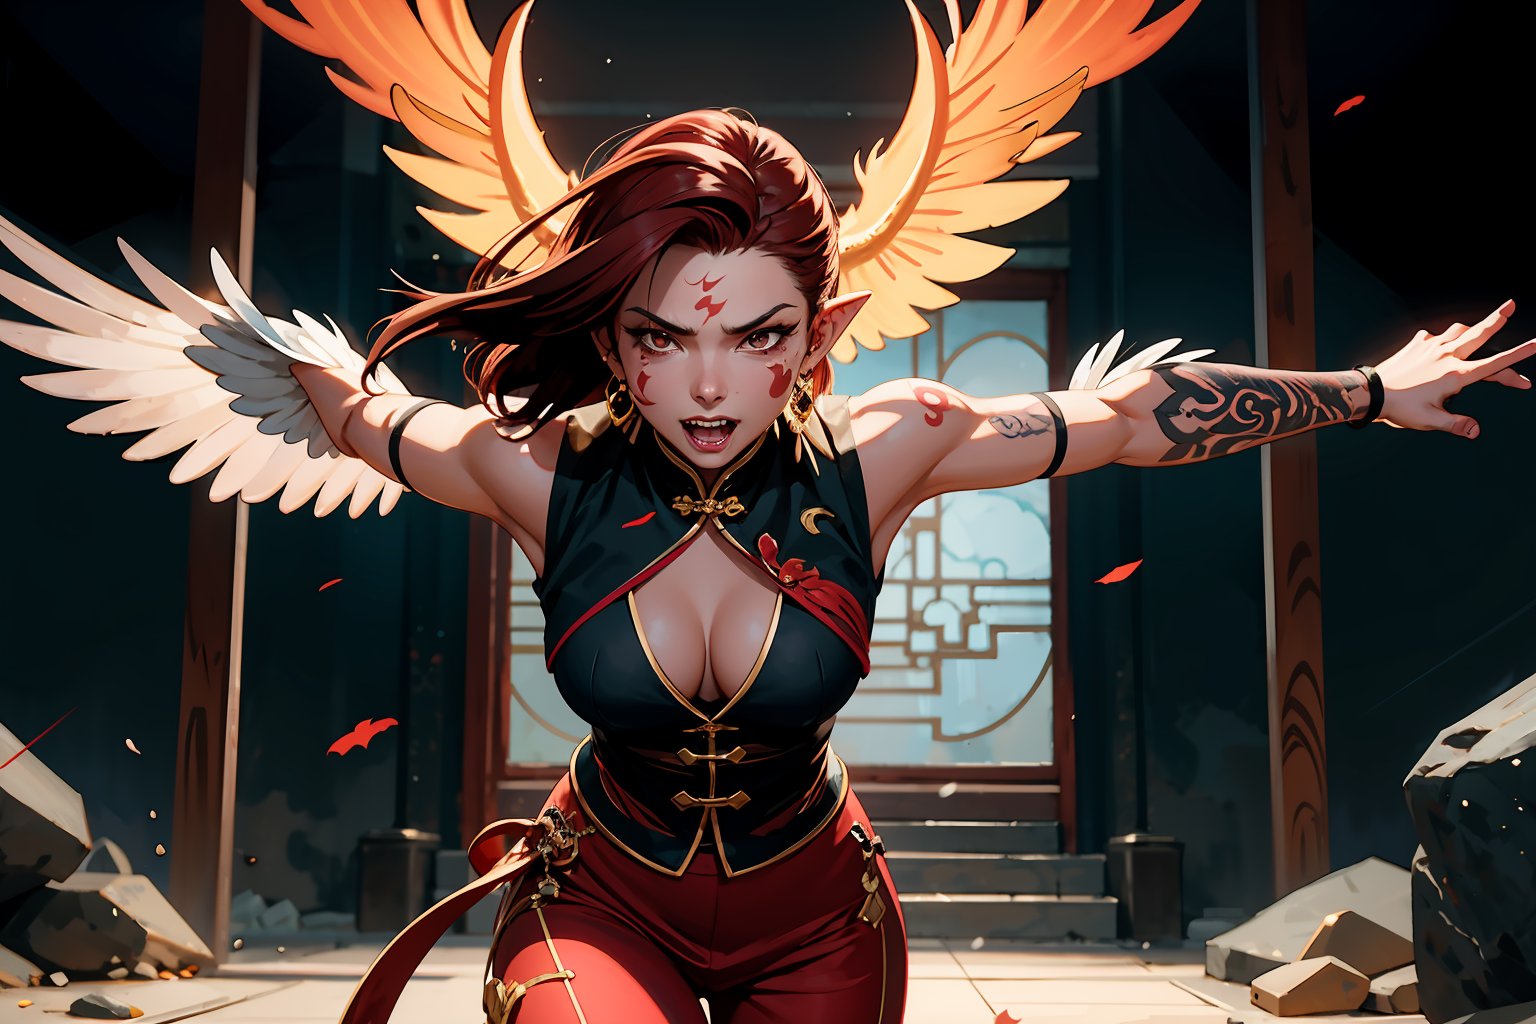 Chinese mythology, solo, 1female, monster_girl, short hair, dark red hair, (facial marks), fierce face, evil face, fangs, sexy lips, (pointed ears), (dark skin), strong body, (phoenix tattoo), (a single wing behind:1.2), dark red vest, long pants, a heavenly guardian, its normally radiant aura now dimmed by mortal wounds, bursts into the grand hall with frantic urgency. The once-stalwart warrior's usually unyielding expression is replaced by a look of desperation as it rushes to convey crucial information to the gathered officials. In a chaotic flurry of motion, the injured god stumbles forward, its usually immaculate attire now disheveled and bloodied, Chinese martial arts animation style